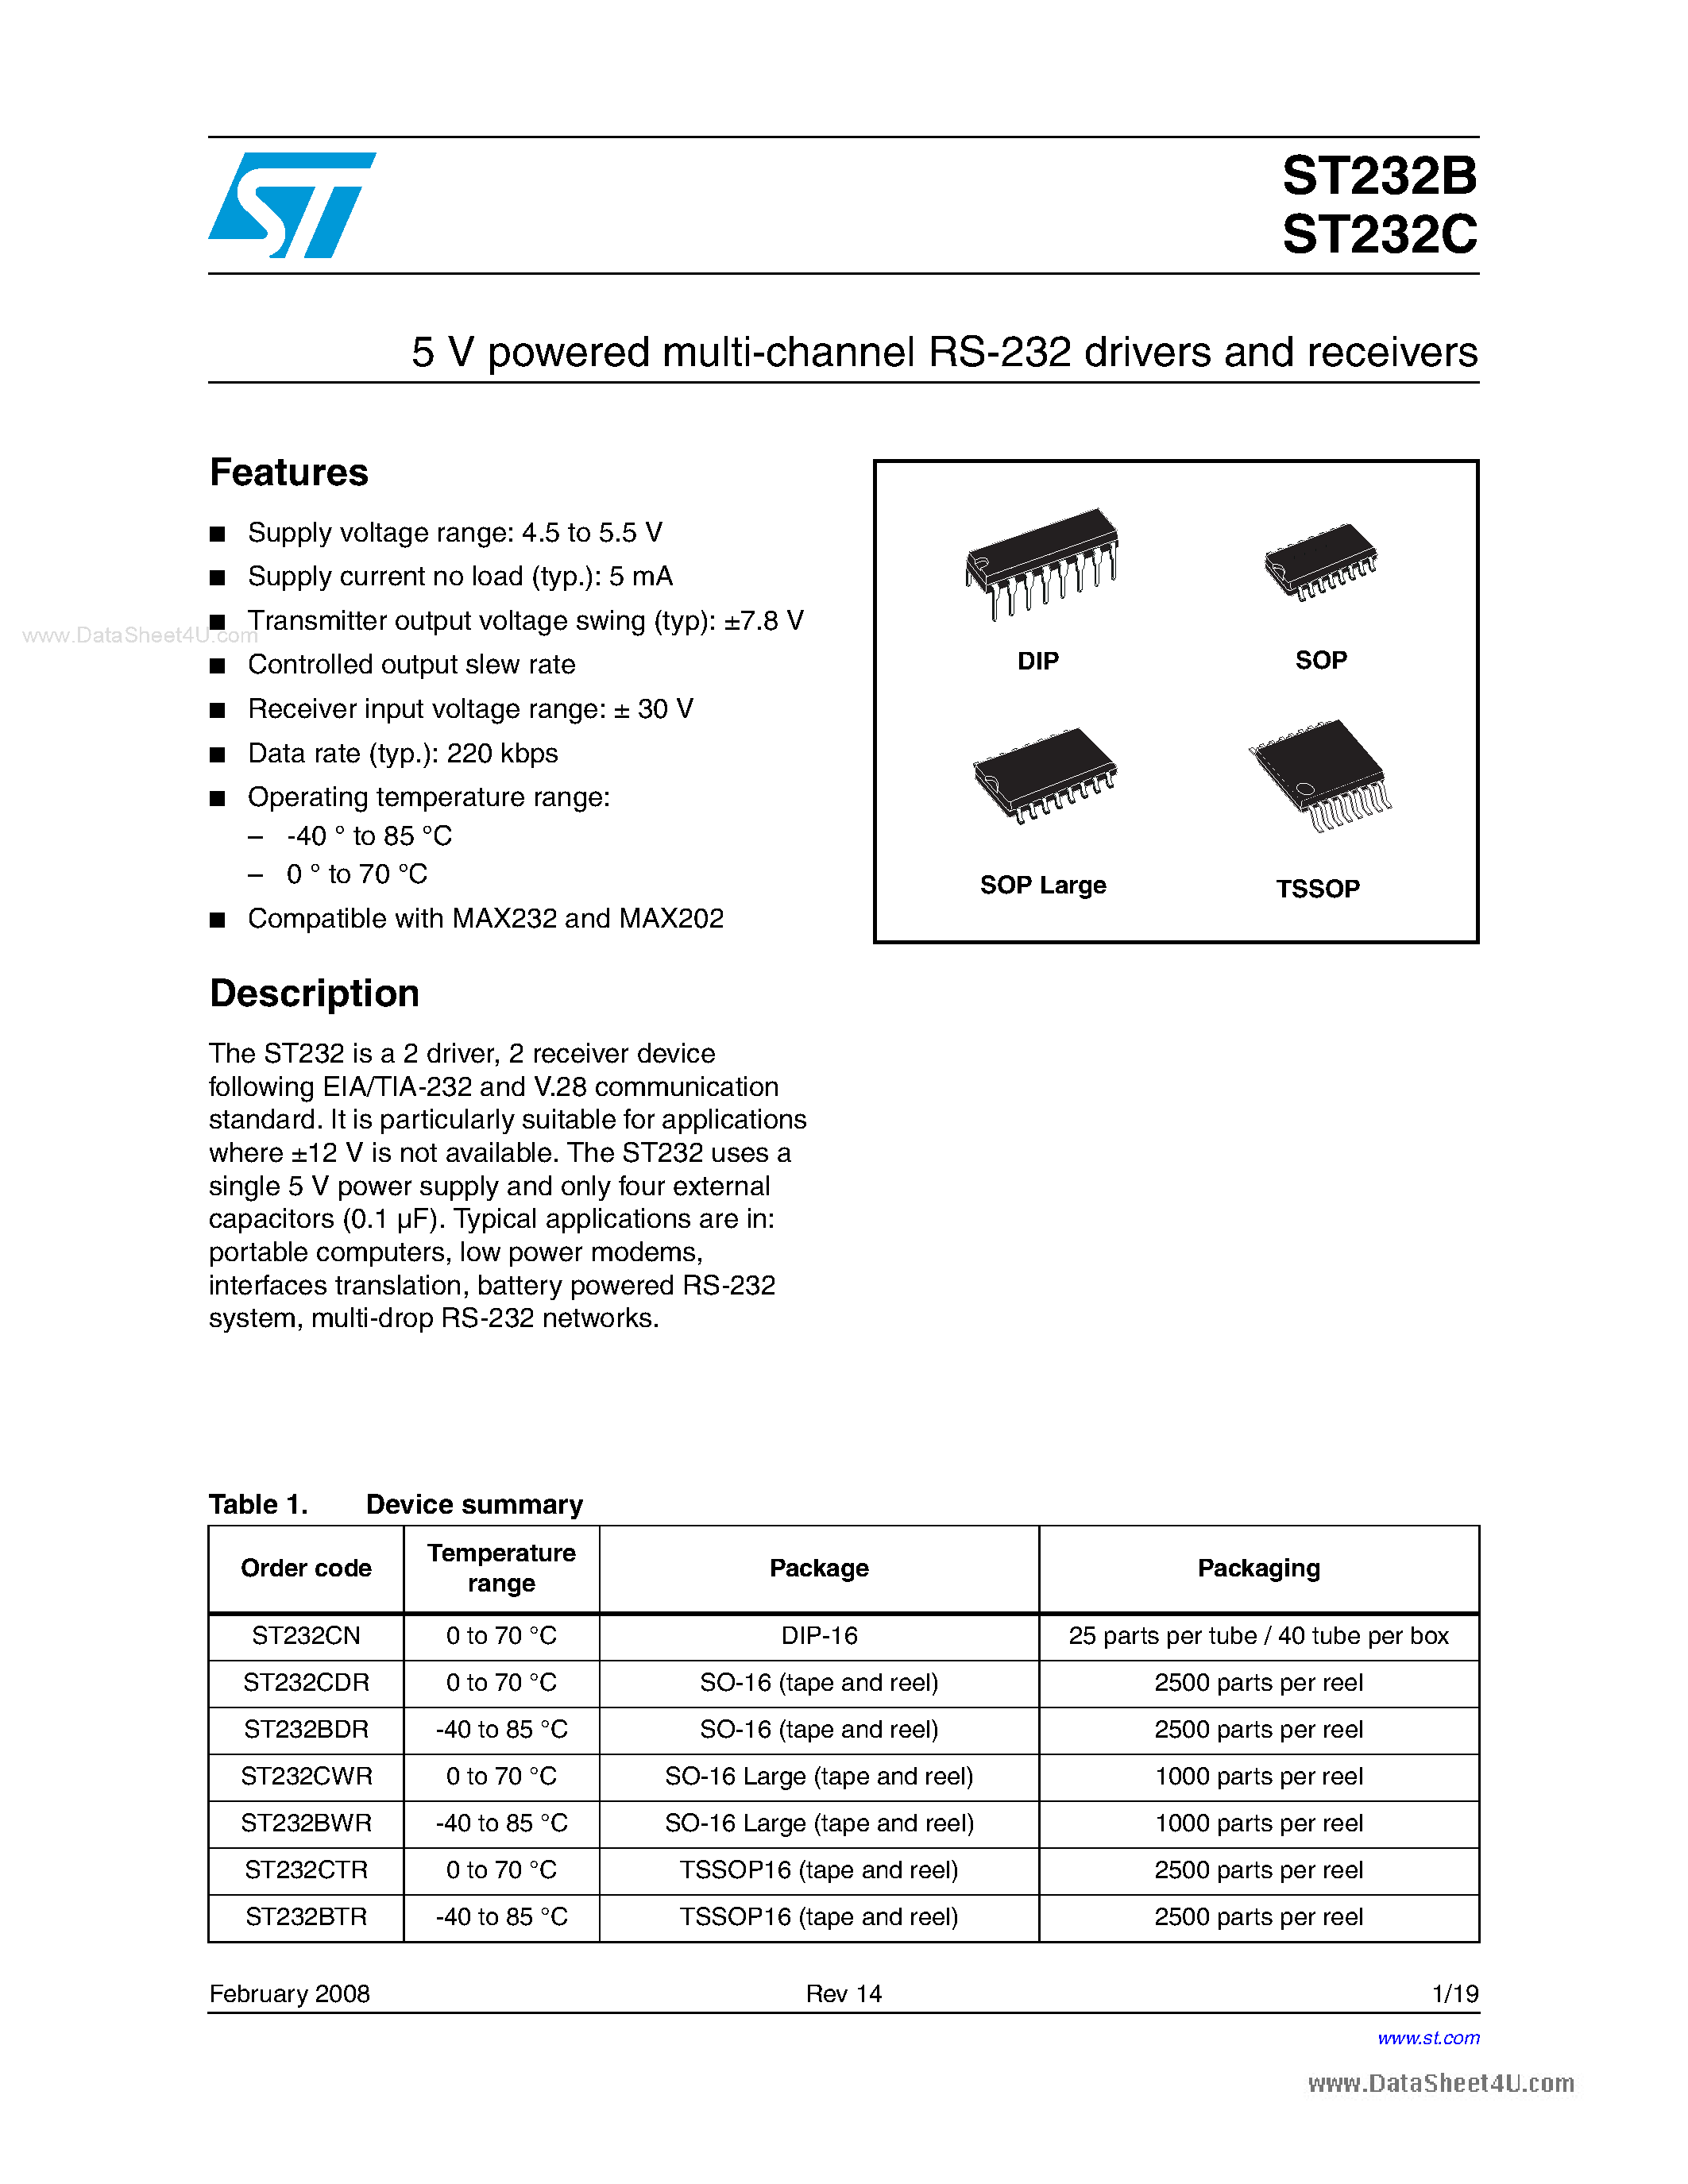 Datasheet ST232B - (ST232B / ST232C) 5V Powered Multi-channel RS-232 Drivers And Receivers page 1